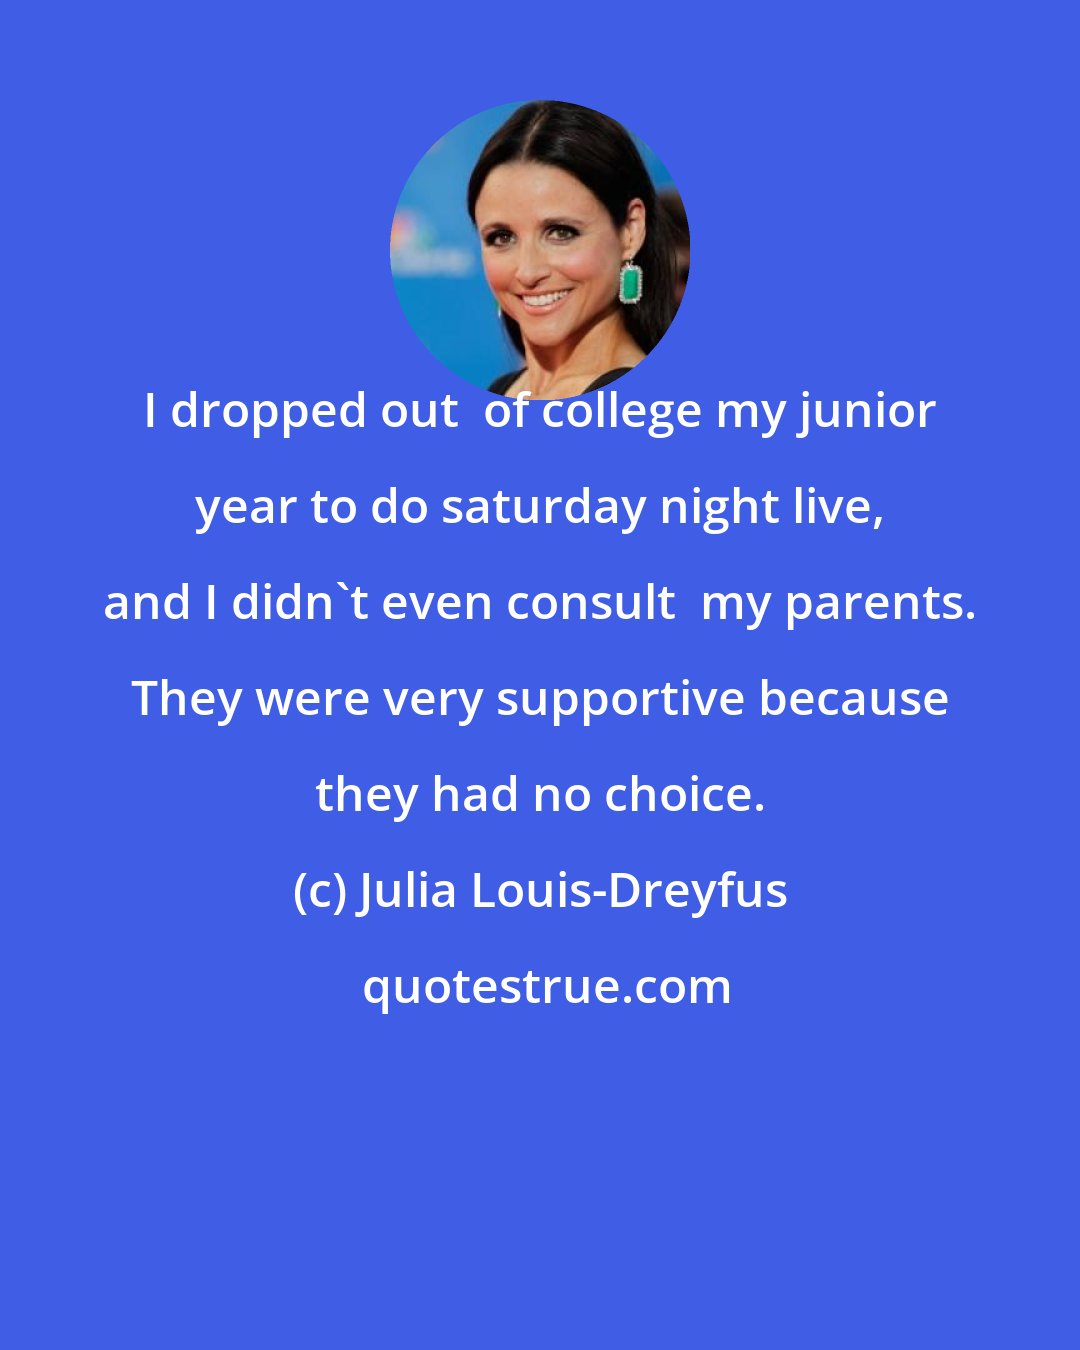 Julia Louis-Dreyfus: I dropped out  of college my junior year to do saturday night live, and I didn't even consult  my parents. They were very supportive because they had no choice.